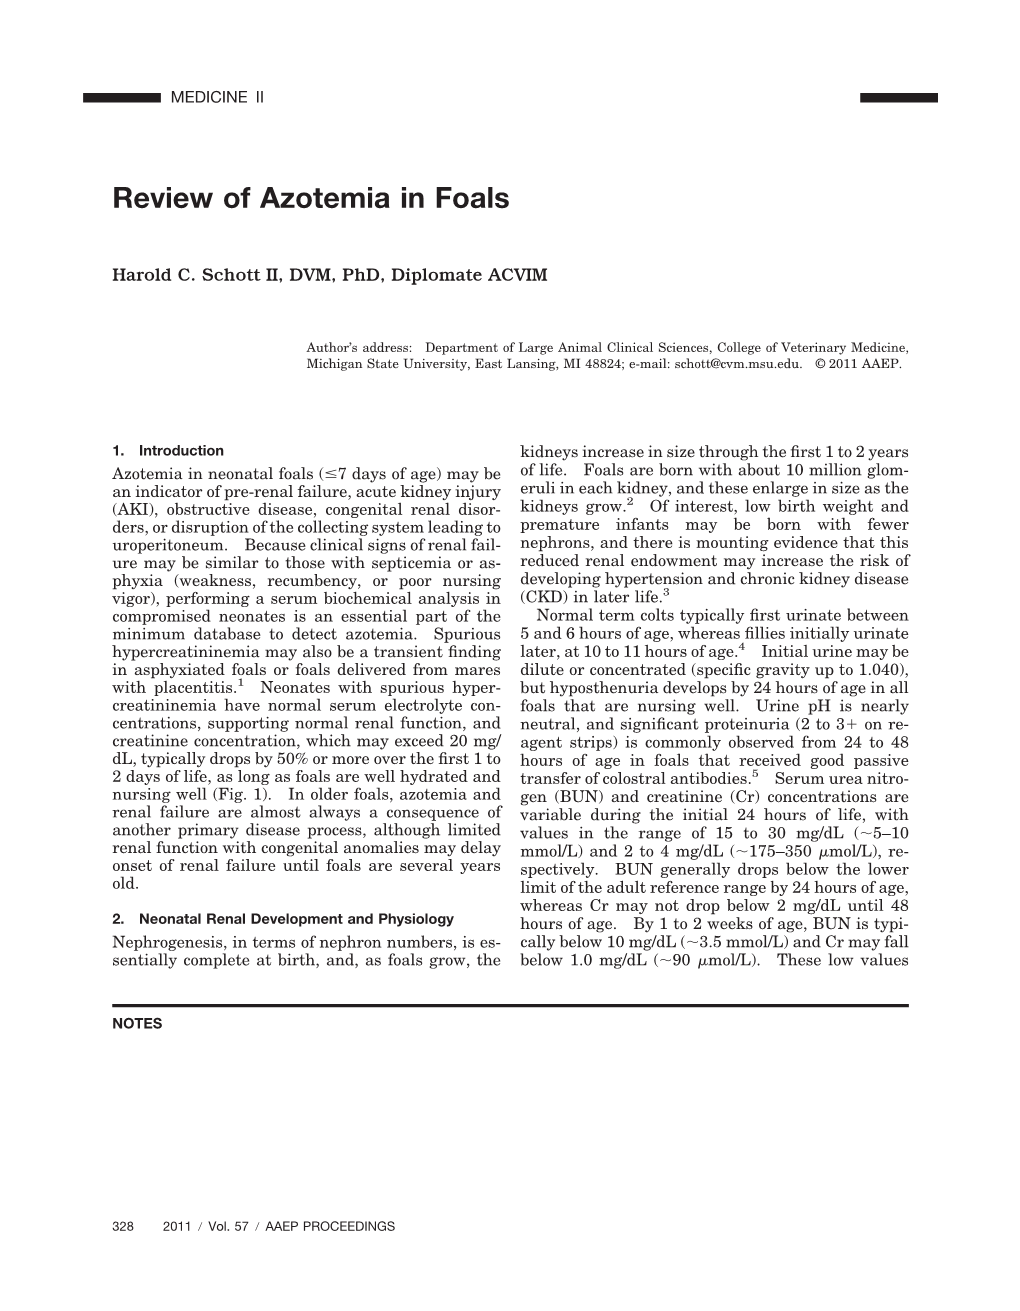 Review of Azotemia in Foals